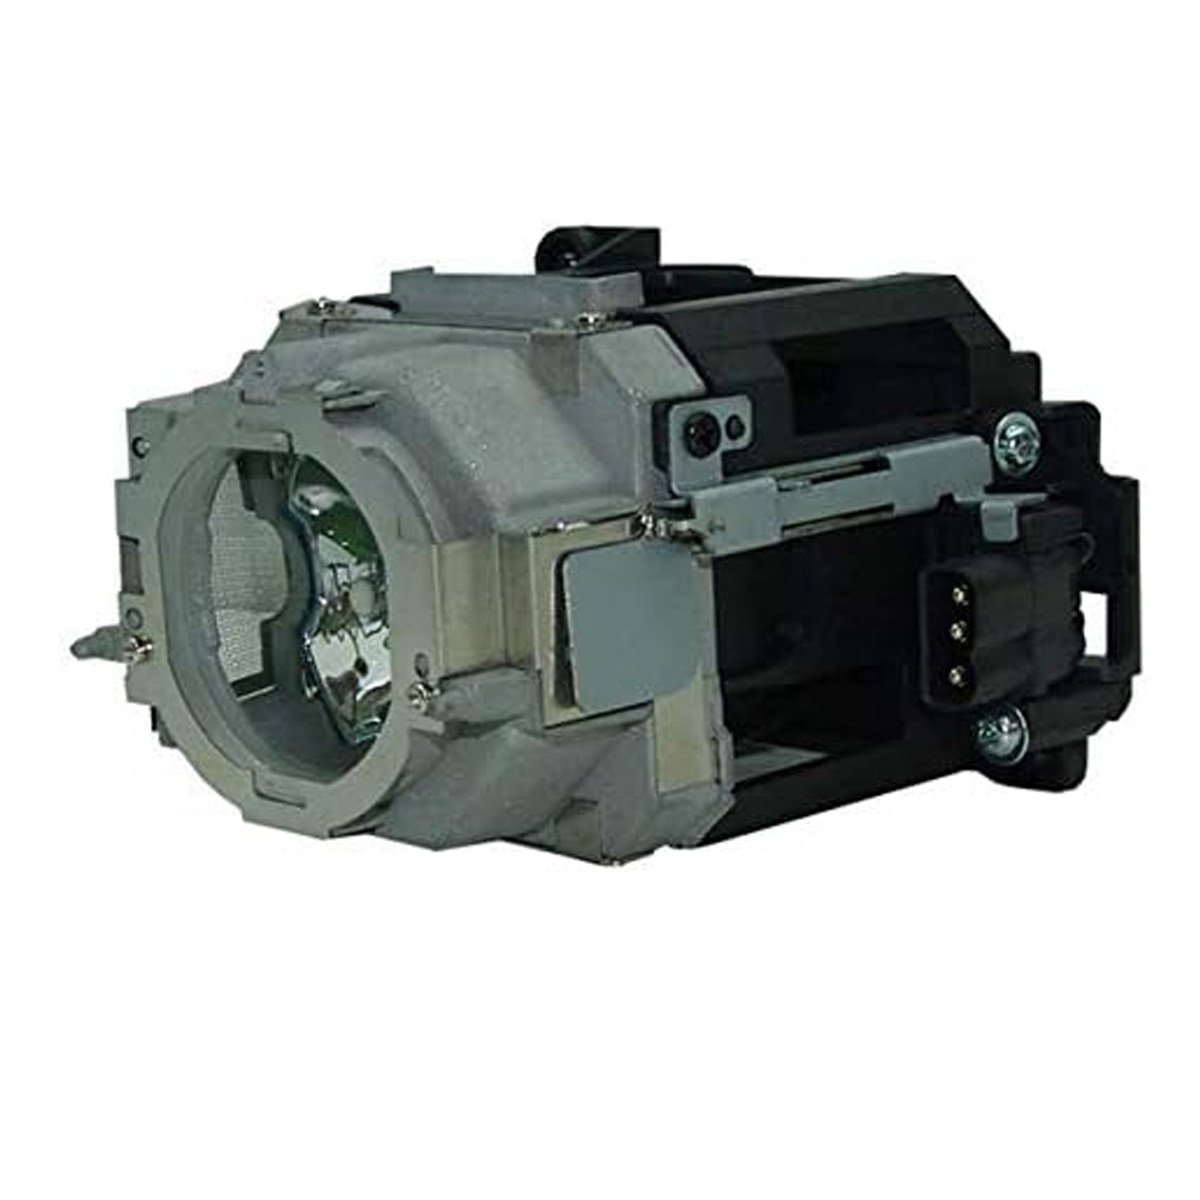 Replacement Projector lamp AN-C430LP For SHARP PG-C355W XG-C335X XG-C350X